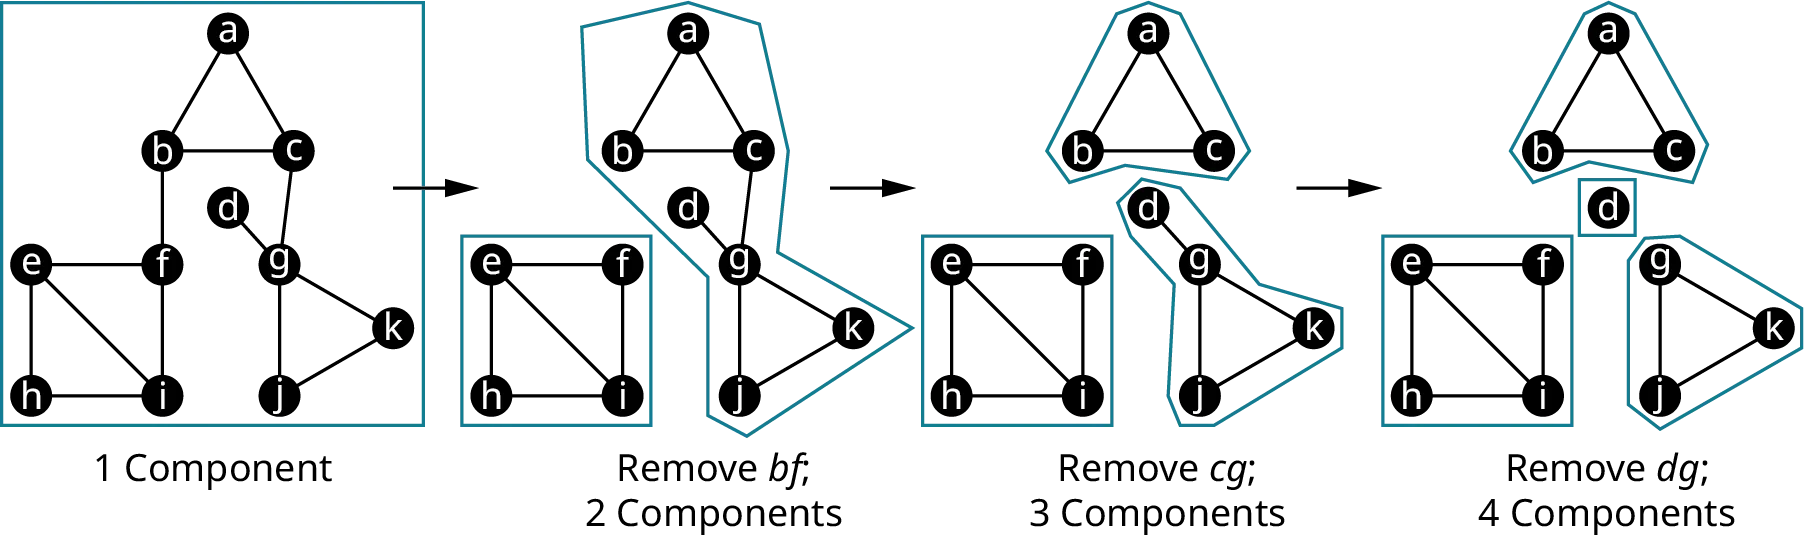 Four graphs. The first graph has two triangles and a square. The first triangle has vertices, a, b, and c. The second triangle has vertices, g, k, and j. The square has the vertices, e, f, h, and i. An edge connects e and i. The bridges connect b f, c g, and d g. The second graph is the same. The square is separated. The third graph shows the square and the triangles separated. The second triangle is connected to the vertex, d. In the fourth graph, the triangles, square, and the d vertex are separated.